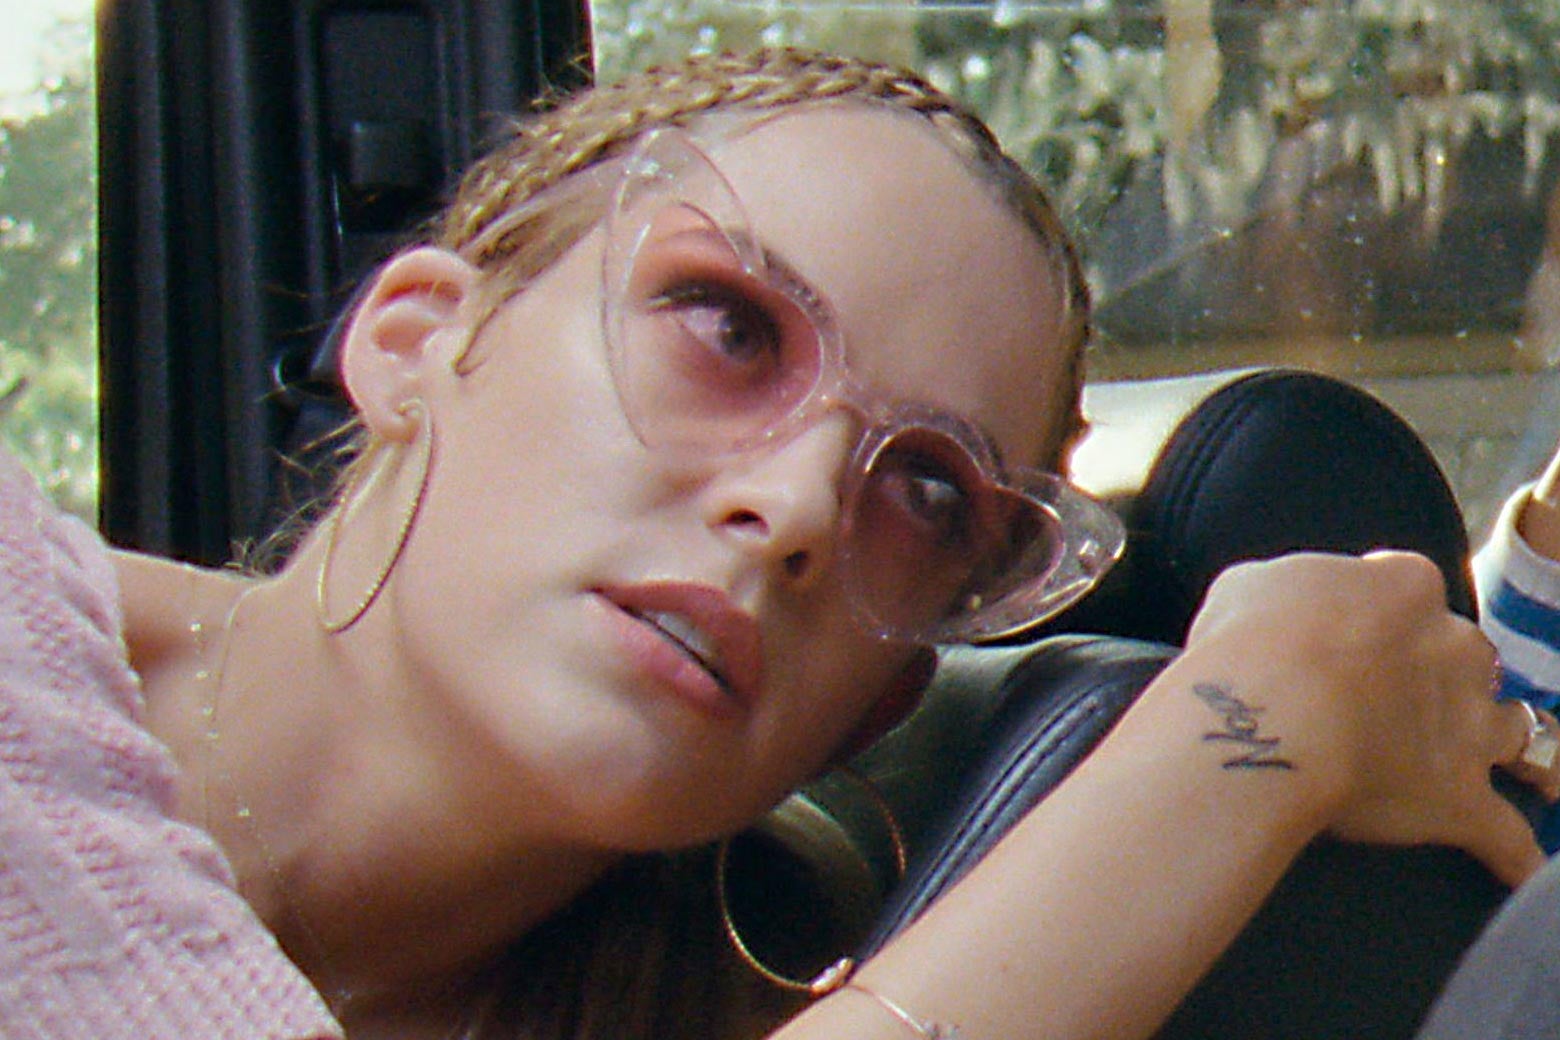 Riley Keough in rose-tinted heart-shaped sunglasses.